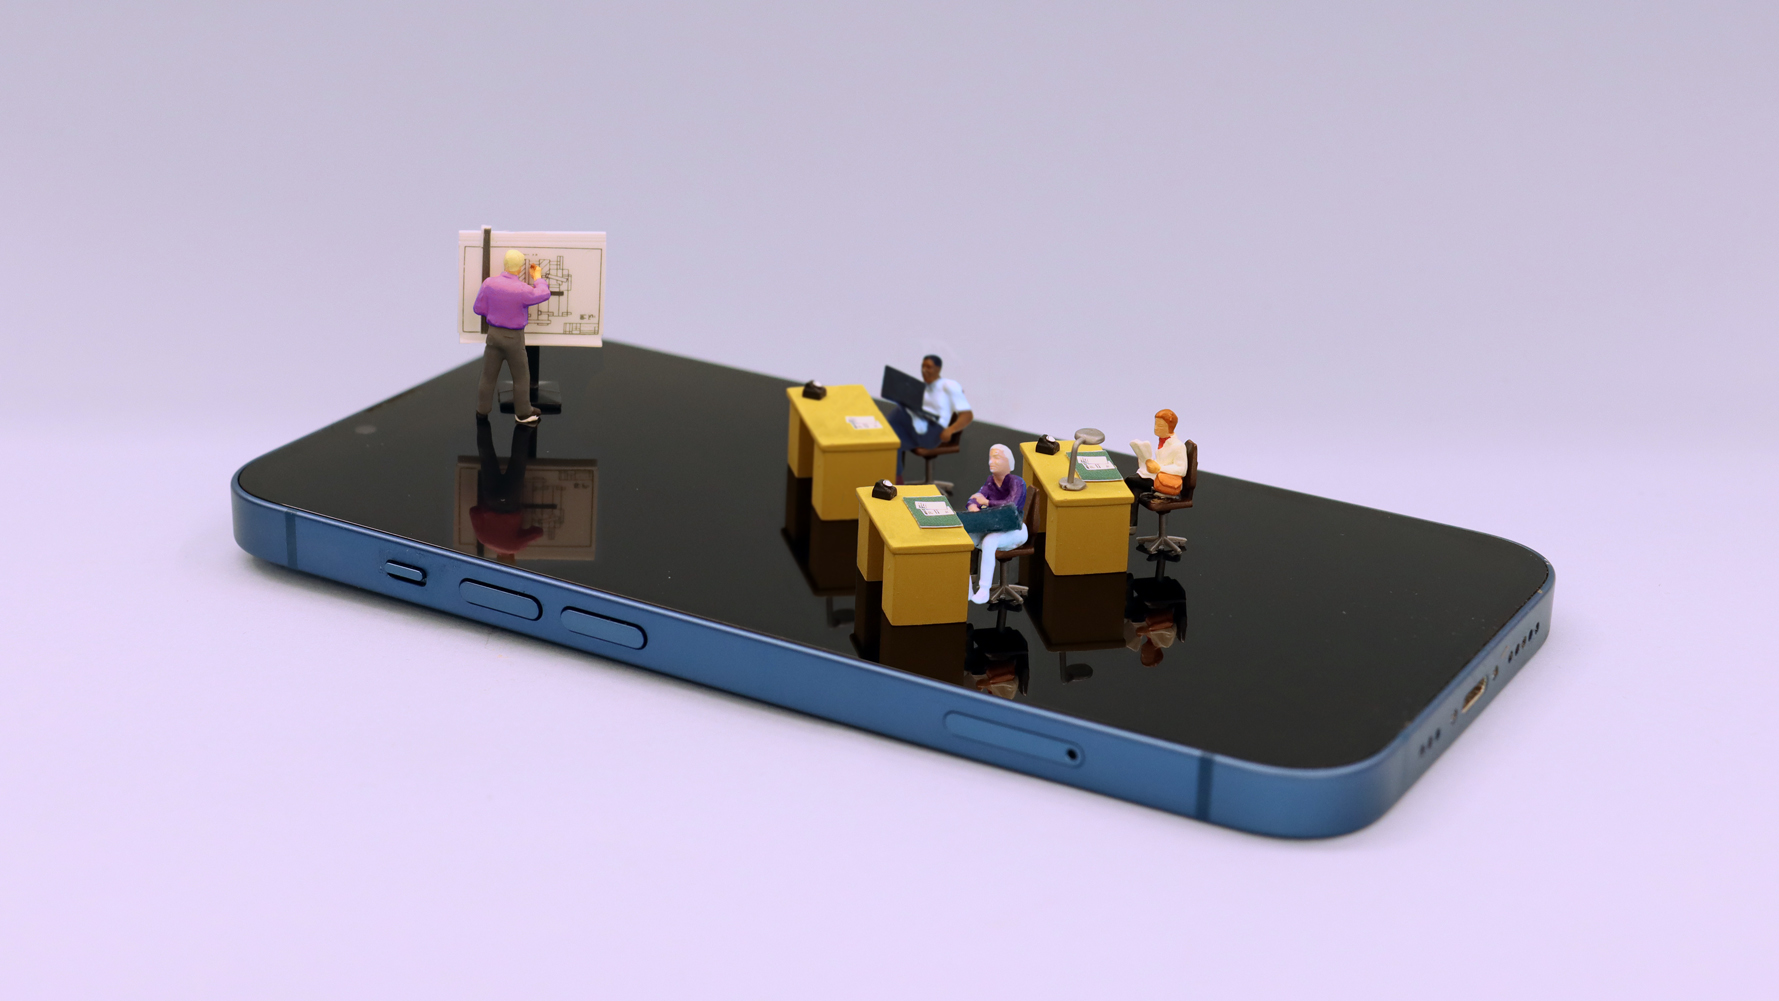 employees study workplace qualifications for career progression on a giant mobile phone